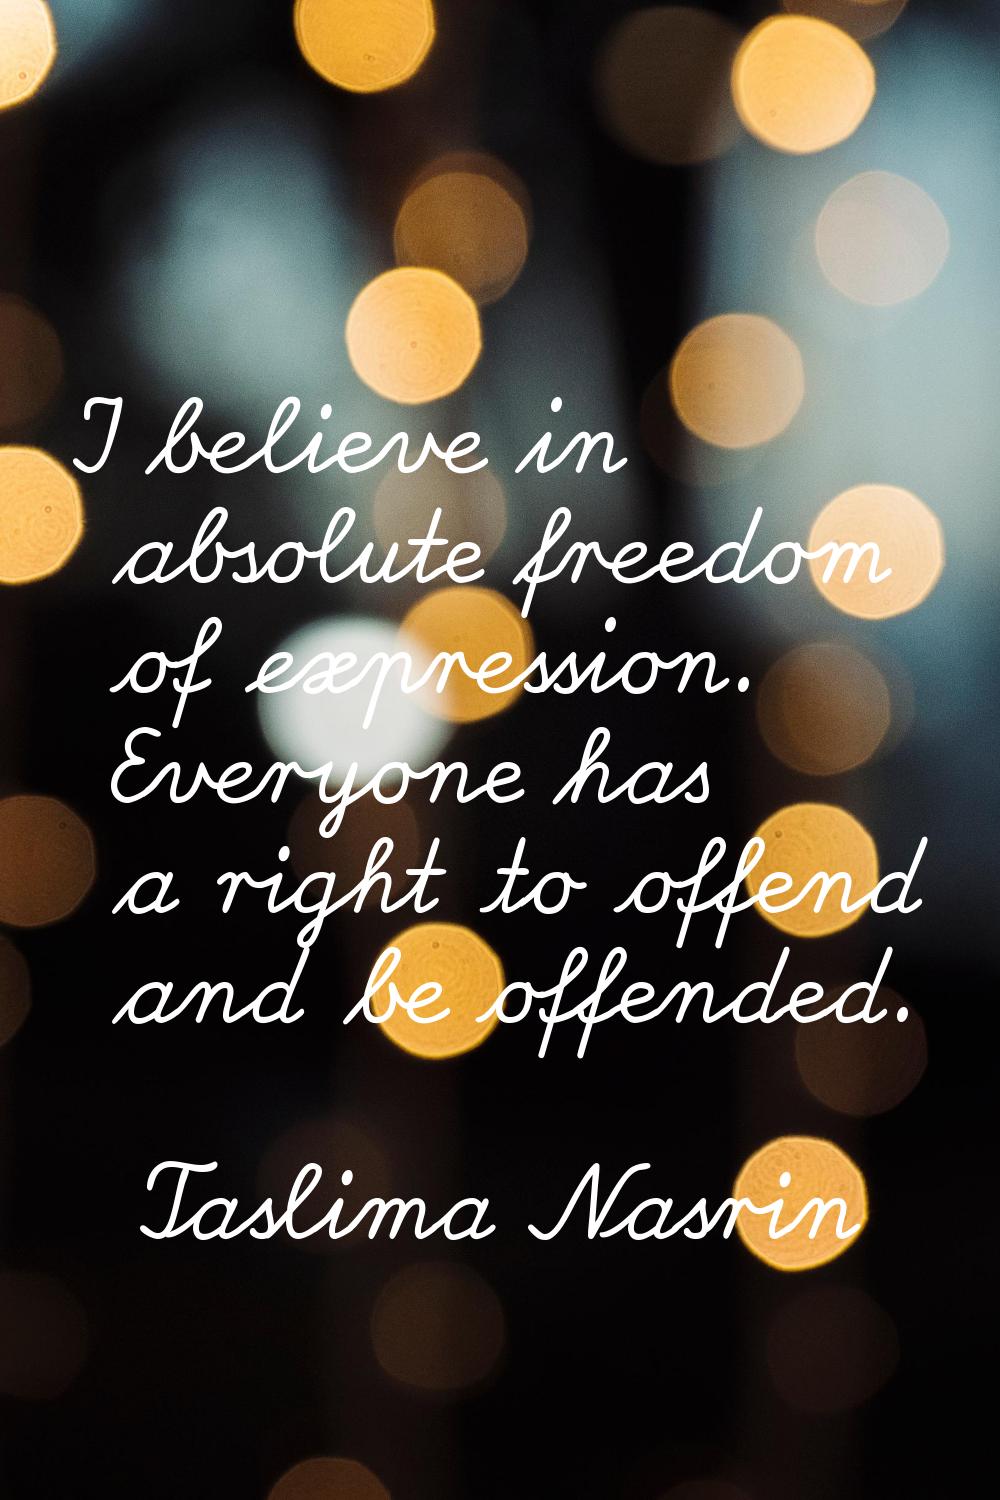 I believe in absolute freedom of expression. Everyone has a right to offend and be offended.